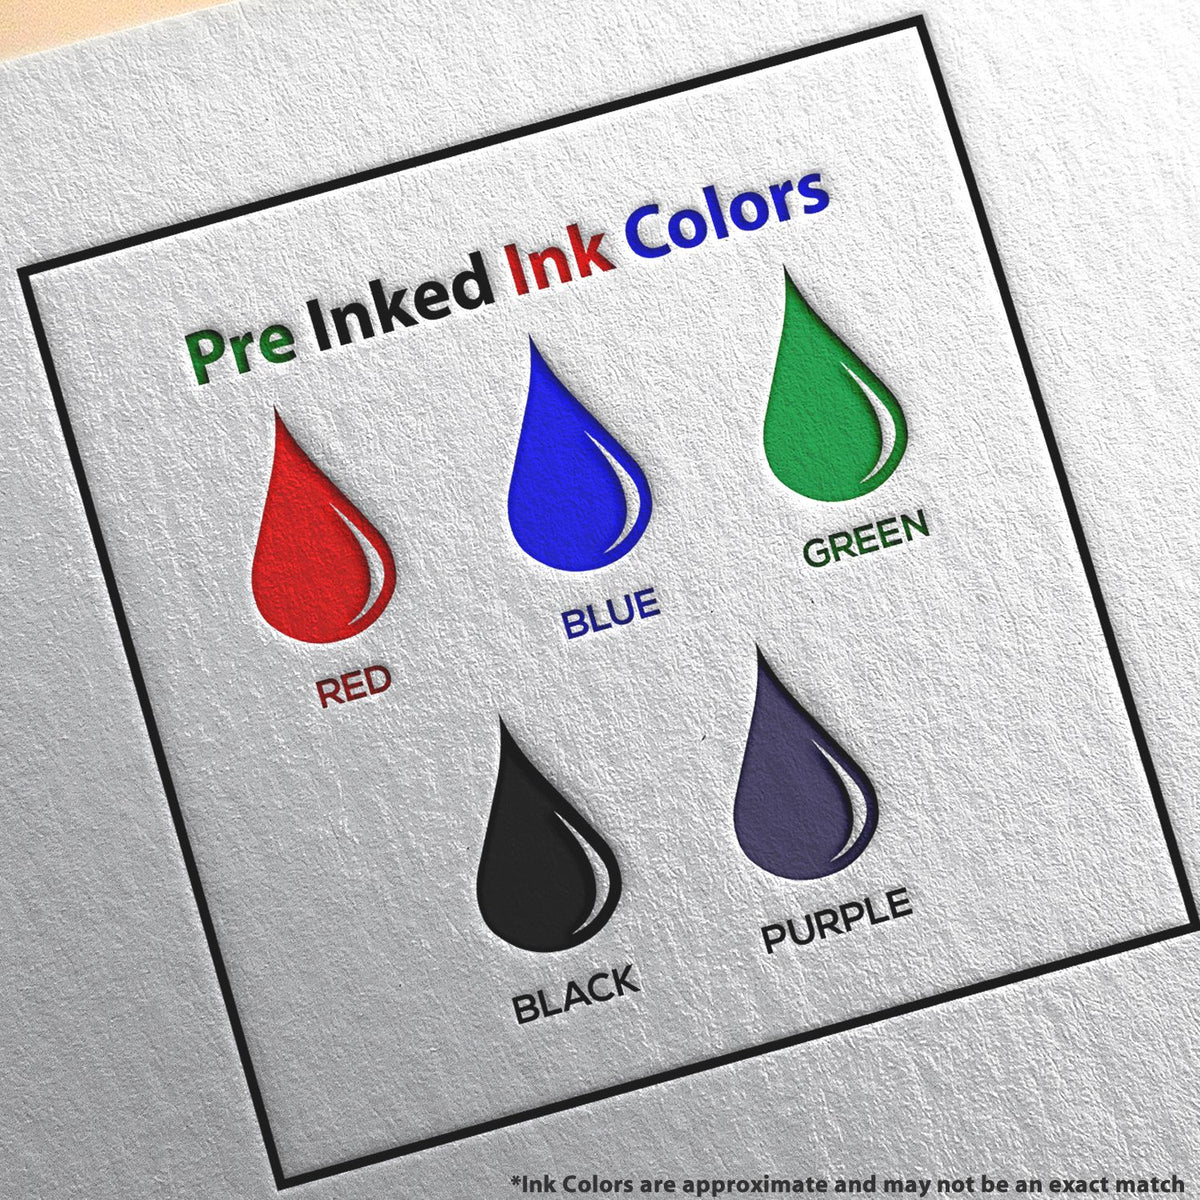 A picture showing the different ink colors or hues available for the Slim Pre-Inked Utah Landscape Architect Seal Stamp product.